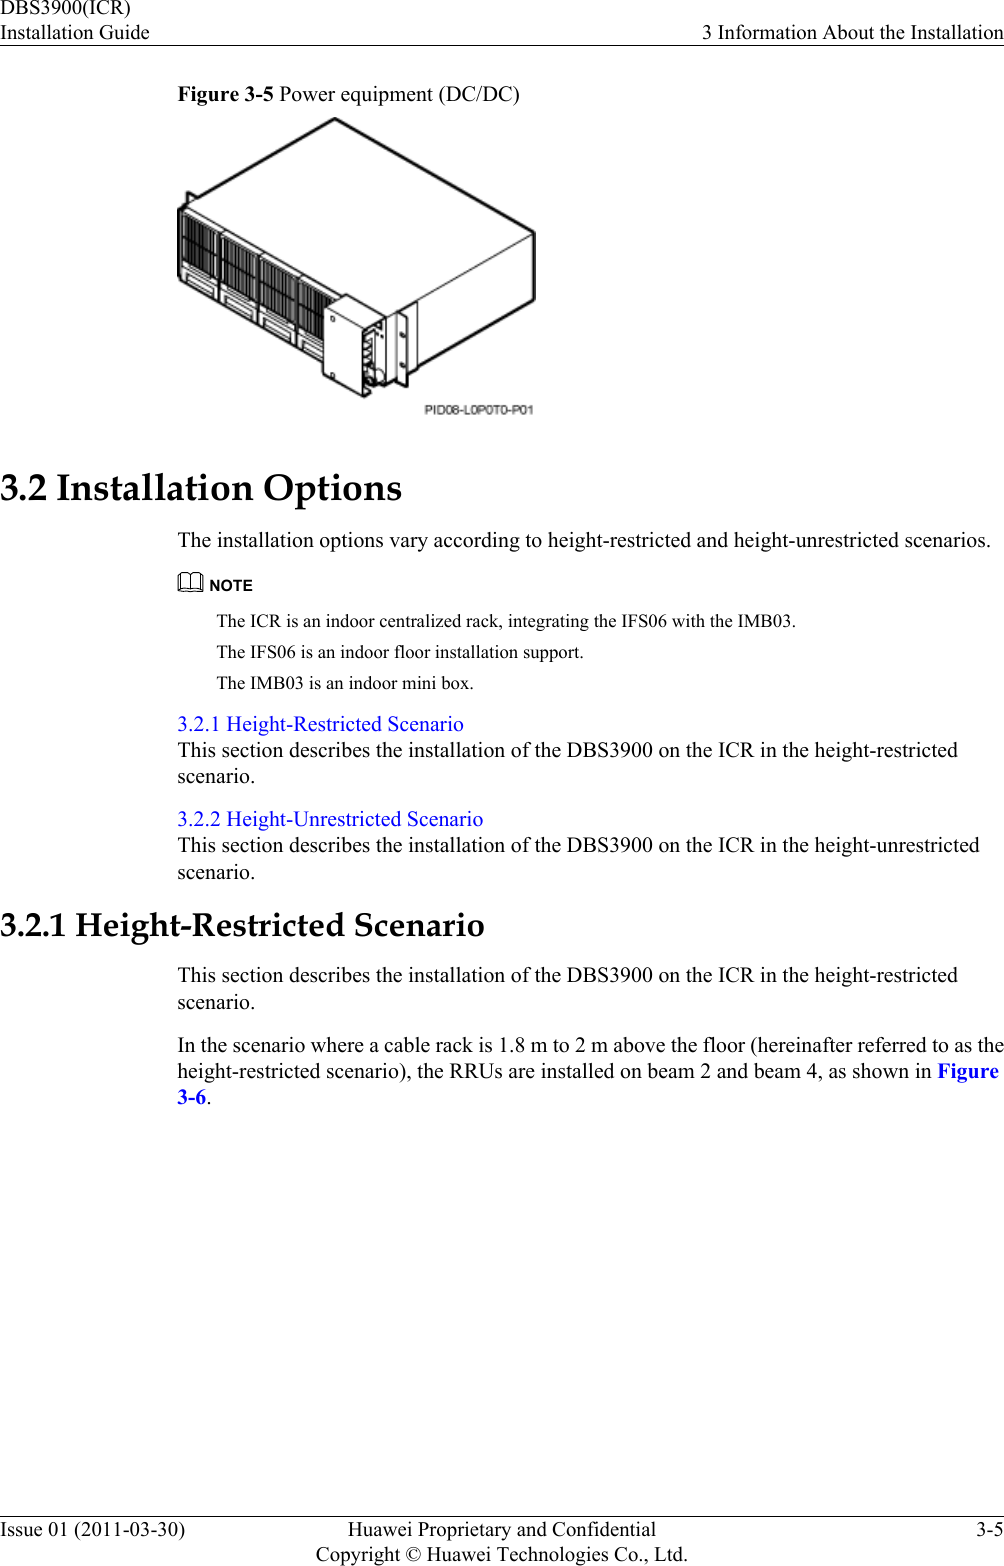 Figure 3-5 Power equipment (DC/DC)3.2 Installation OptionsThe installation options vary according to height-restricted and height-unrestricted scenarios.NOTEThe ICR is an indoor centralized rack, integrating the IFS06 with the IMB03.The IFS06 is an indoor floor installation support.The IMB03 is an indoor mini box.3.2.1 Height-Restricted ScenarioThis section describes the installation of the DBS3900 on the ICR in the height-restrictedscenario.3.2.2 Height-Unrestricted ScenarioThis section describes the installation of the DBS3900 on the ICR in the height-unrestrictedscenario.3.2.1 Height-Restricted ScenarioThis section describes the installation of the DBS3900 on the ICR in the height-restrictedscenario.In the scenario where a cable rack is 1.8 m to 2 m above the floor (hereinafter referred to as theheight-restricted scenario), the RRUs are installed on beam 2 and beam 4, as shown in Figure3-6.DBS3900(ICR)Installation Guide 3 Information About the InstallationIssue 01 (2011-03-30) Huawei Proprietary and ConfidentialCopyright © Huawei Technologies Co., Ltd.3-5